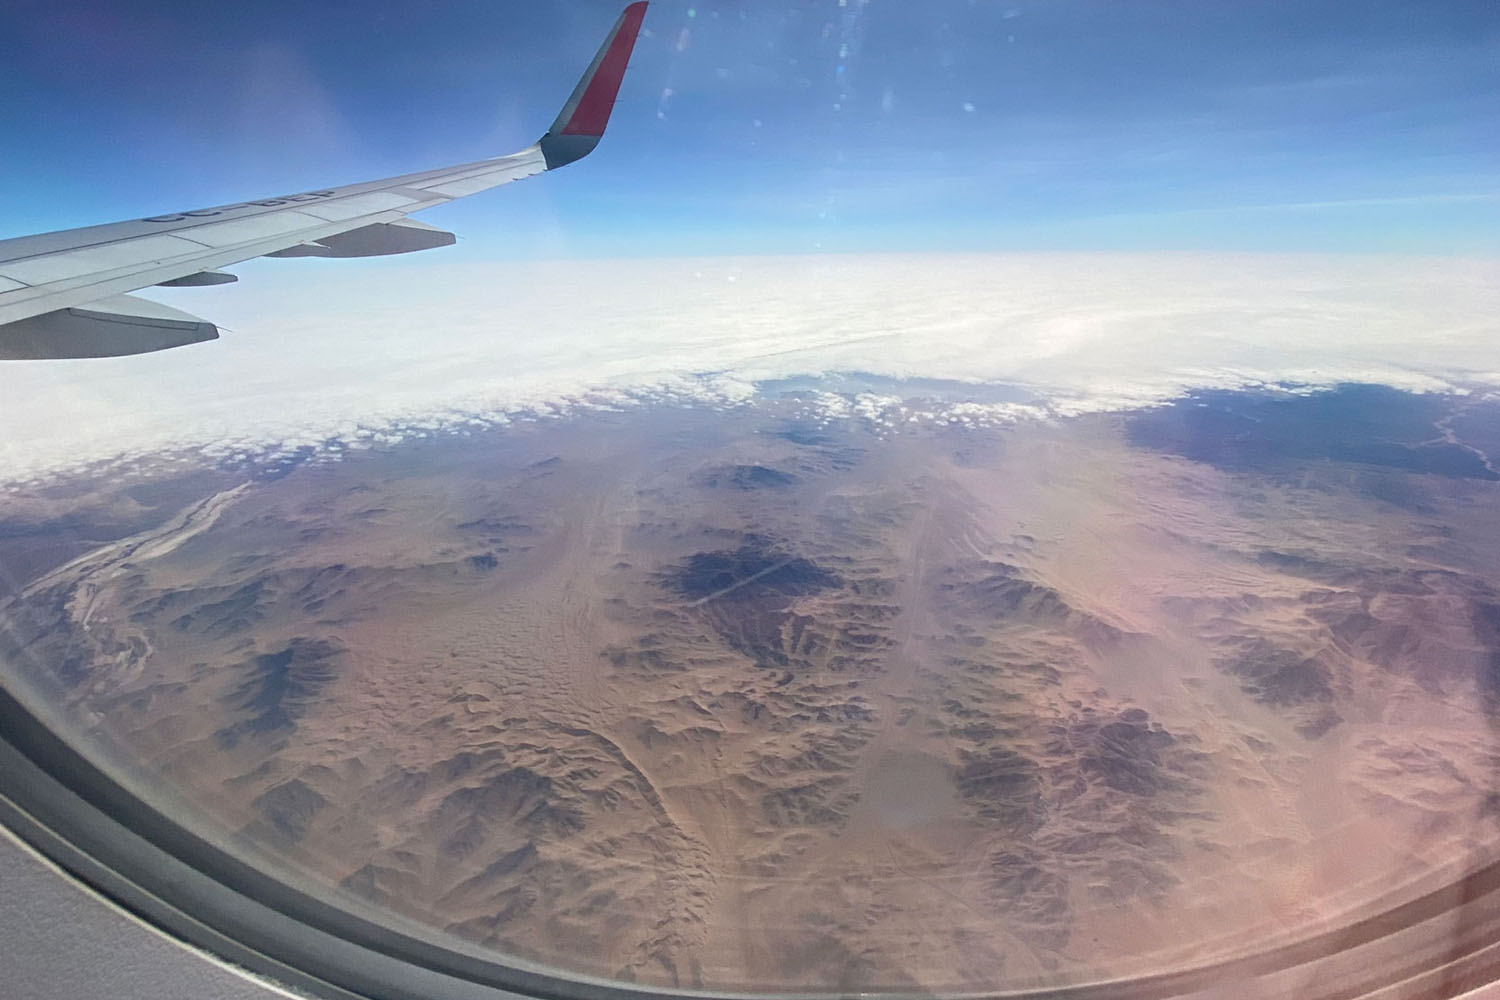 Flying over the vast impressive desert landscape of northern Chile is always spectacular, so window seats are a must, says Baumann. Where the clouds start, the ocean begins.